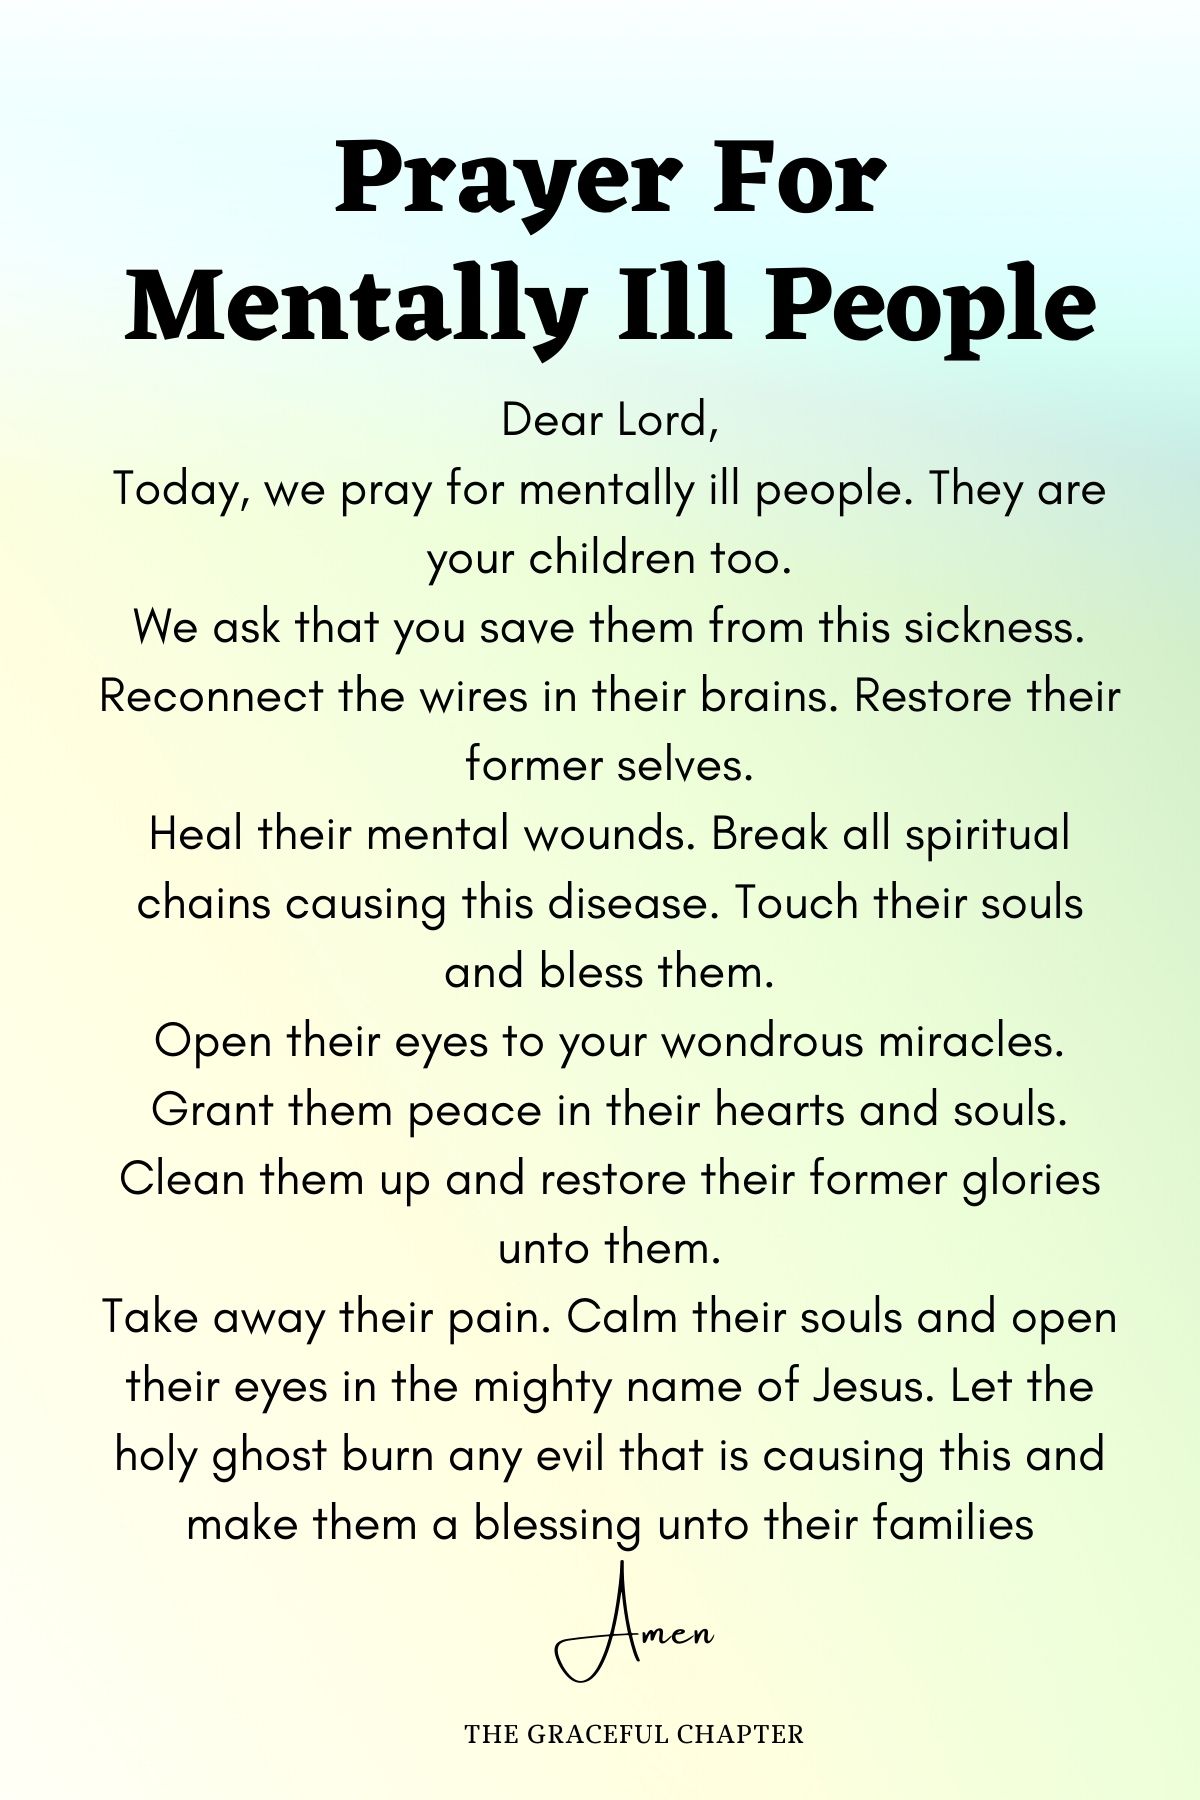 Prayer for mentally ill people